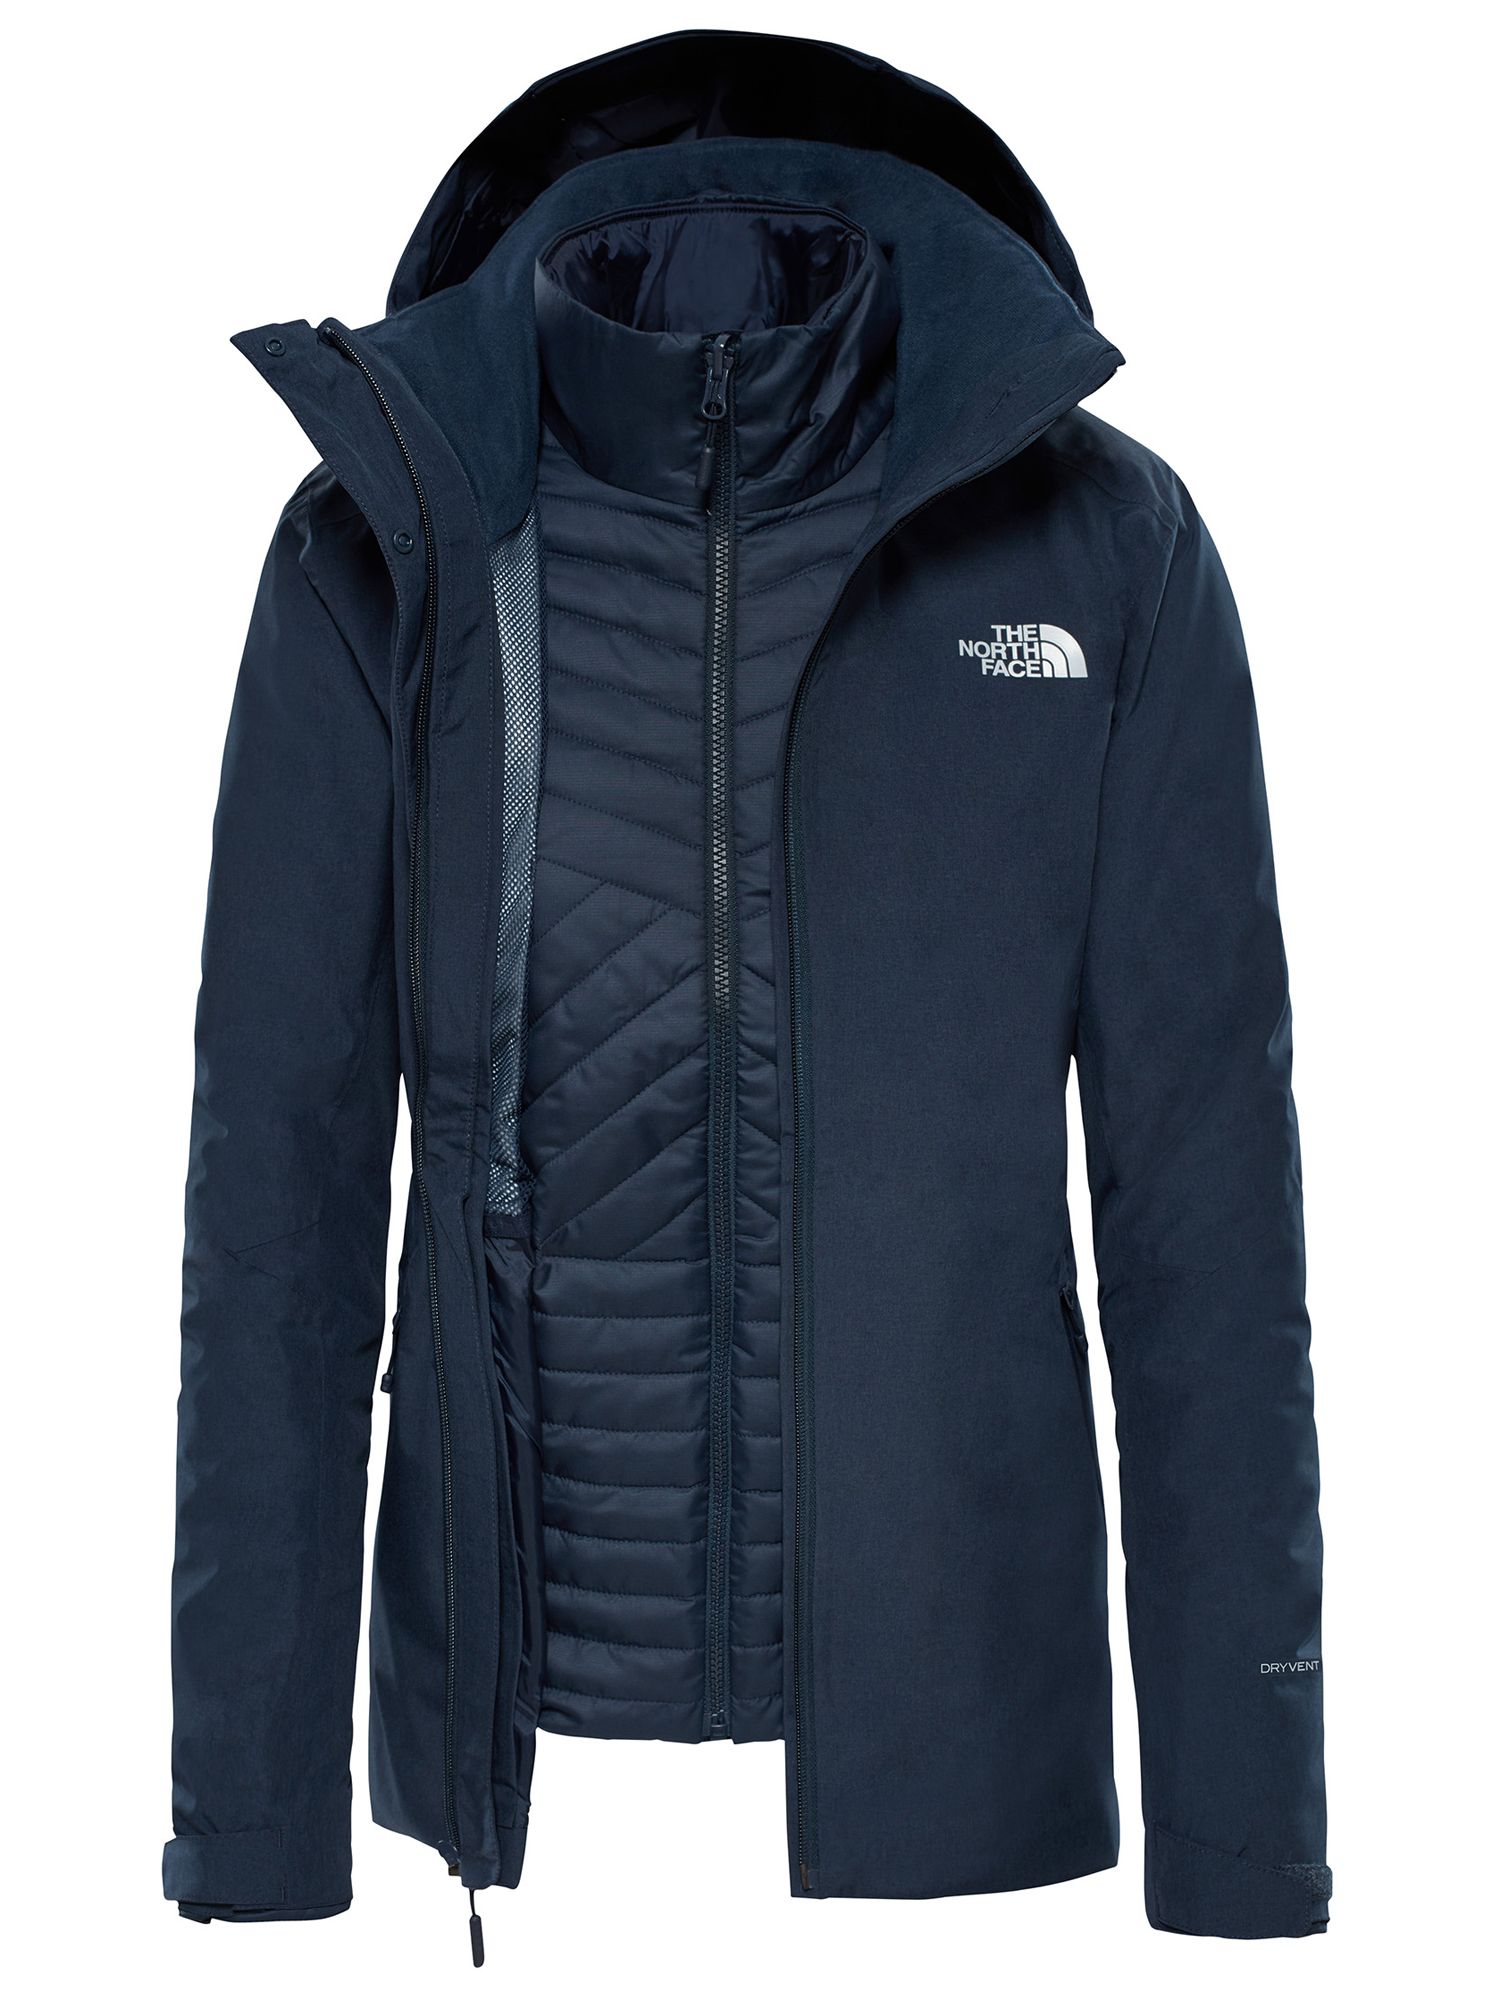 The North Face Inlux Triclimate Women's Waterproof Jacket, Urban Navy